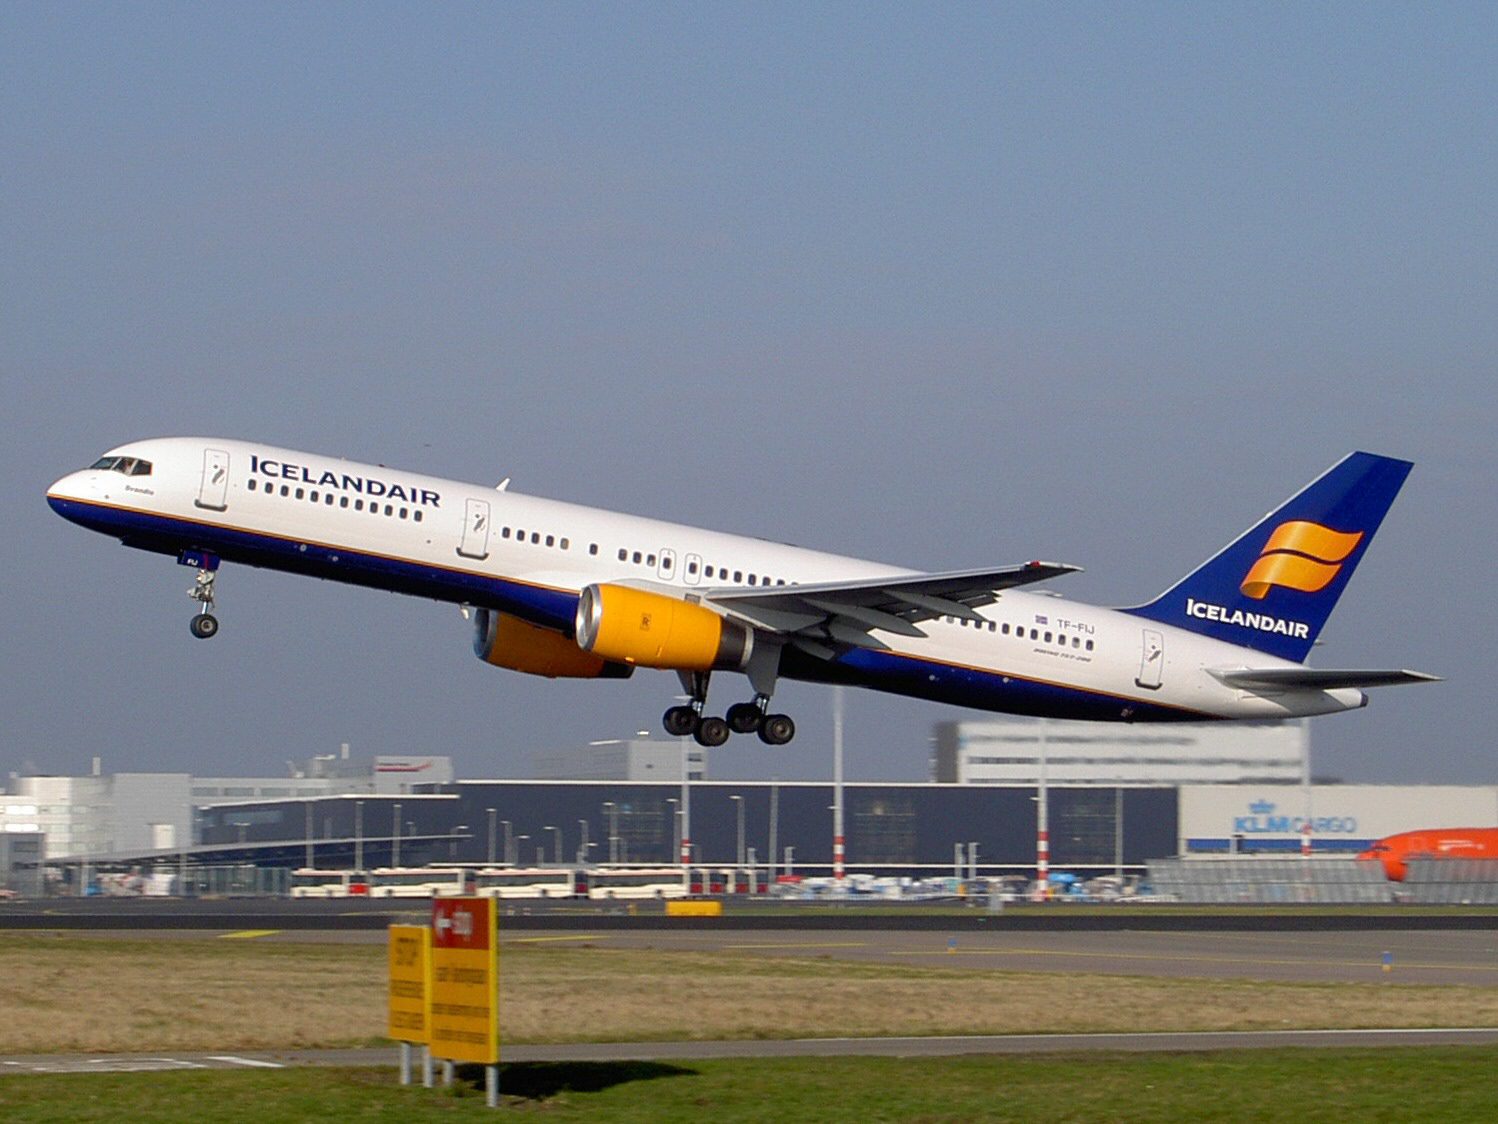 icelandair-to-fire-all-cabin-crew;-pilots-to-handle-respective-responsibilities